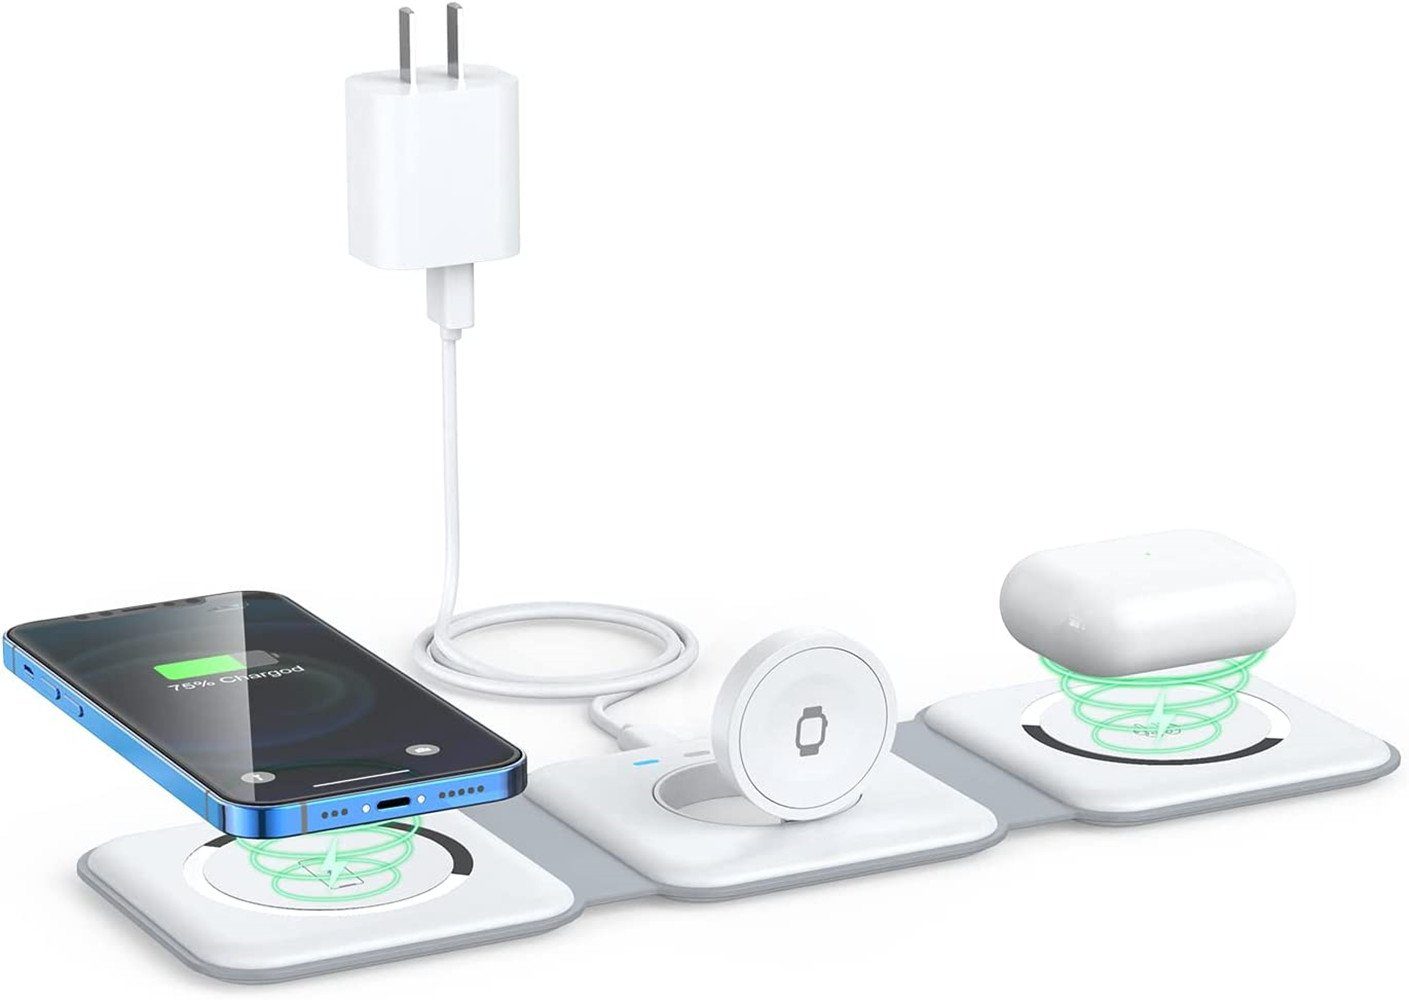 XDeer Wireless Charger-3 in 1,Charger faltbare Ladestation, schnelles  kabelloses Ladepad,kompatibel mit iPhone 13/12/11/8/SE/XS/Max, iWatch,  AirPods 3/2/Pro und Samsung Wireless Charger (set)